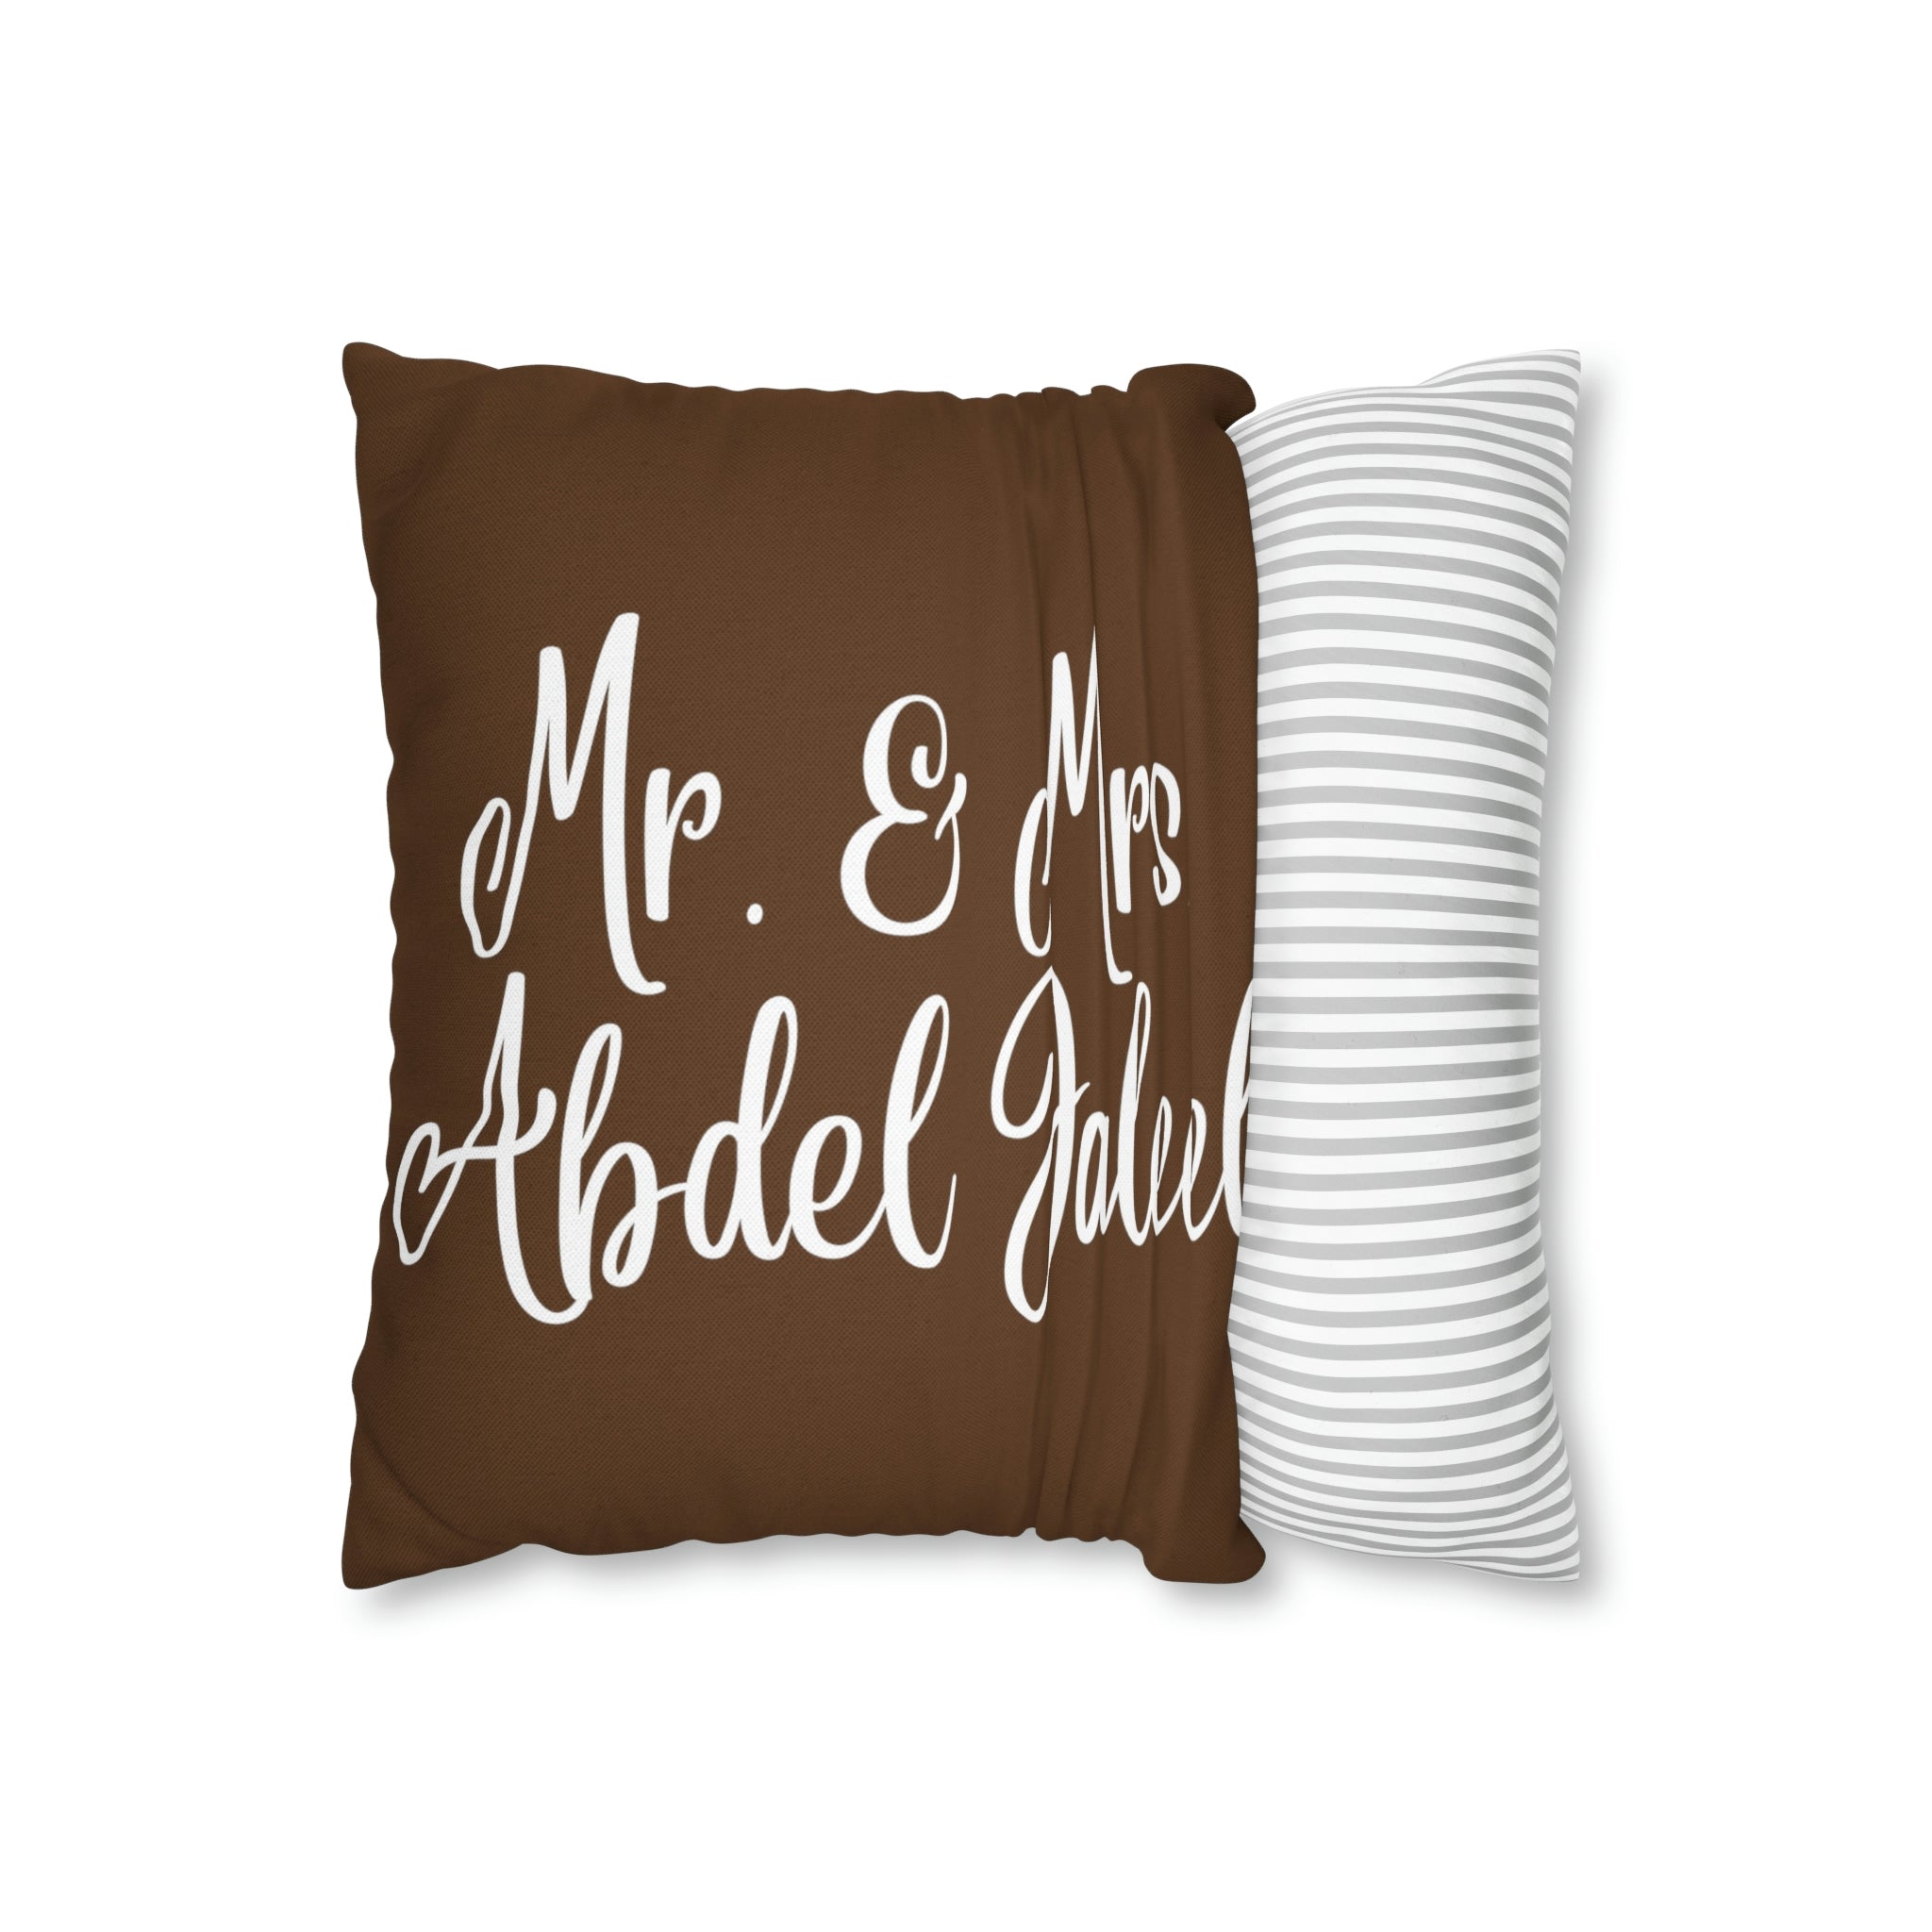 Personalized Pillow Case Spun Polyester Square Pillow Case (If you'd like another color or have different wording please just let me know) Throw Pillow Case Muslim Home Prayer Room Home Decor